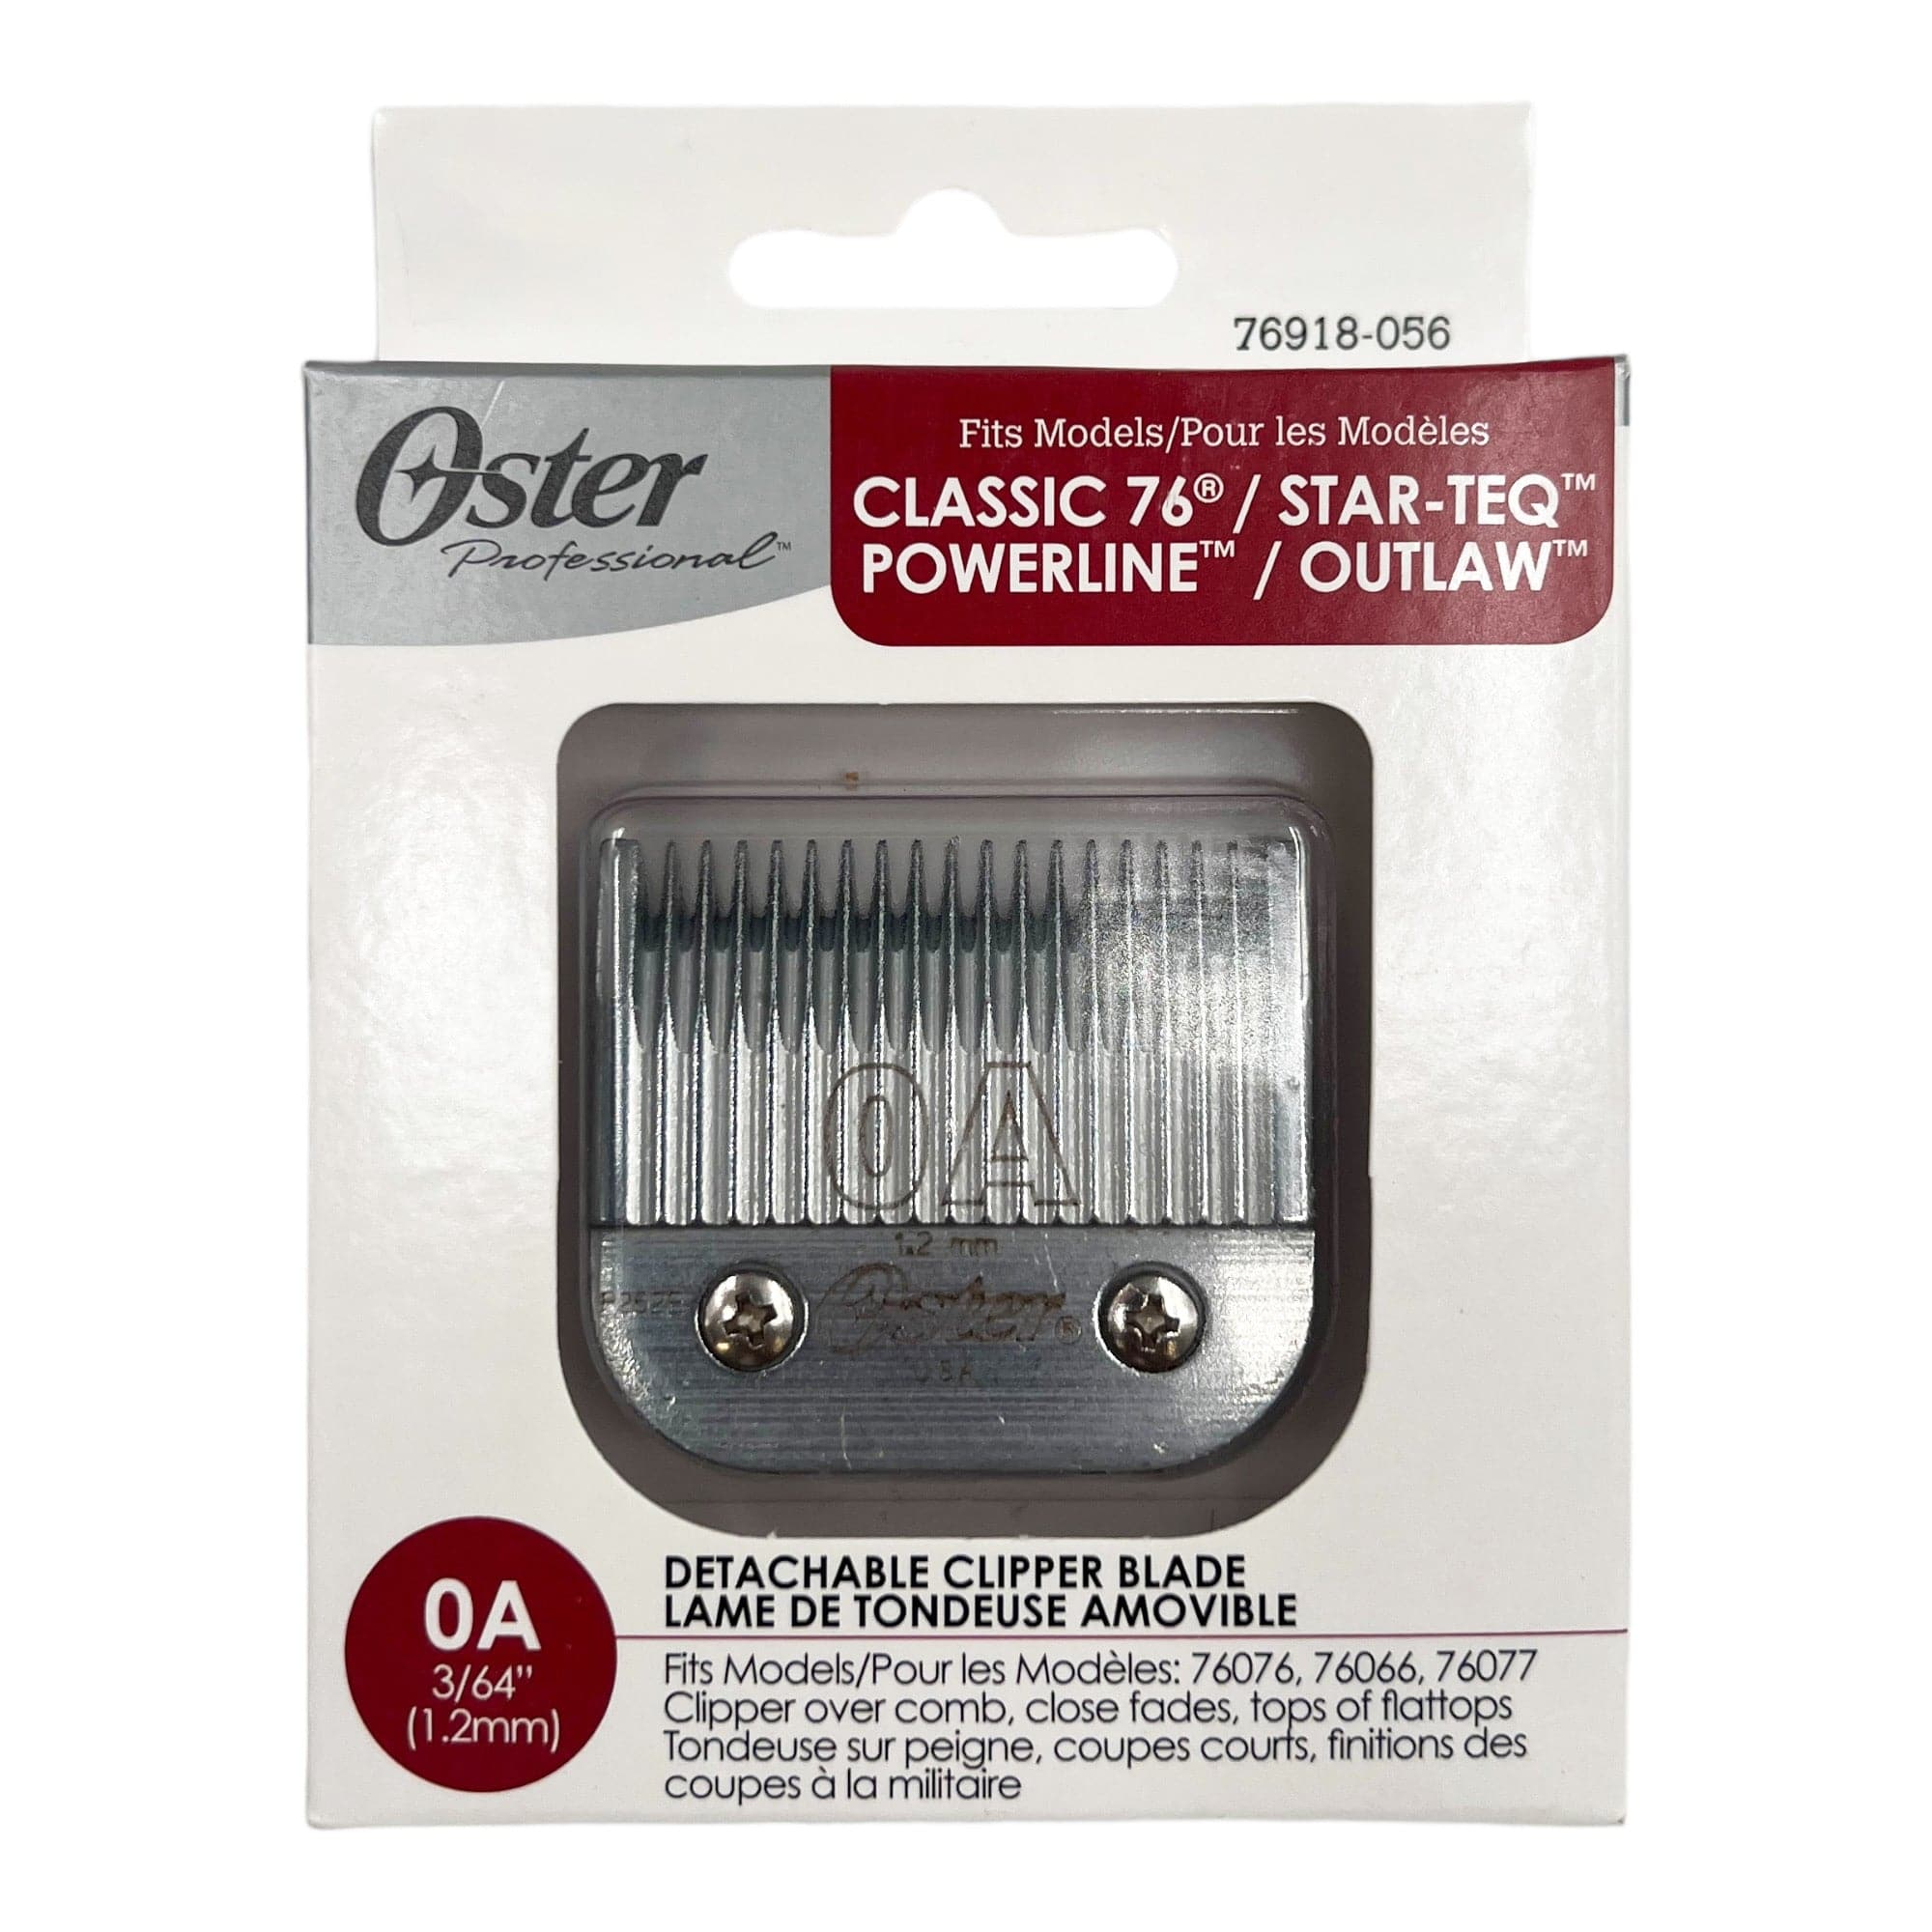 Oster - 076918-056 Detachable Blade Size 0A - 1.2mm